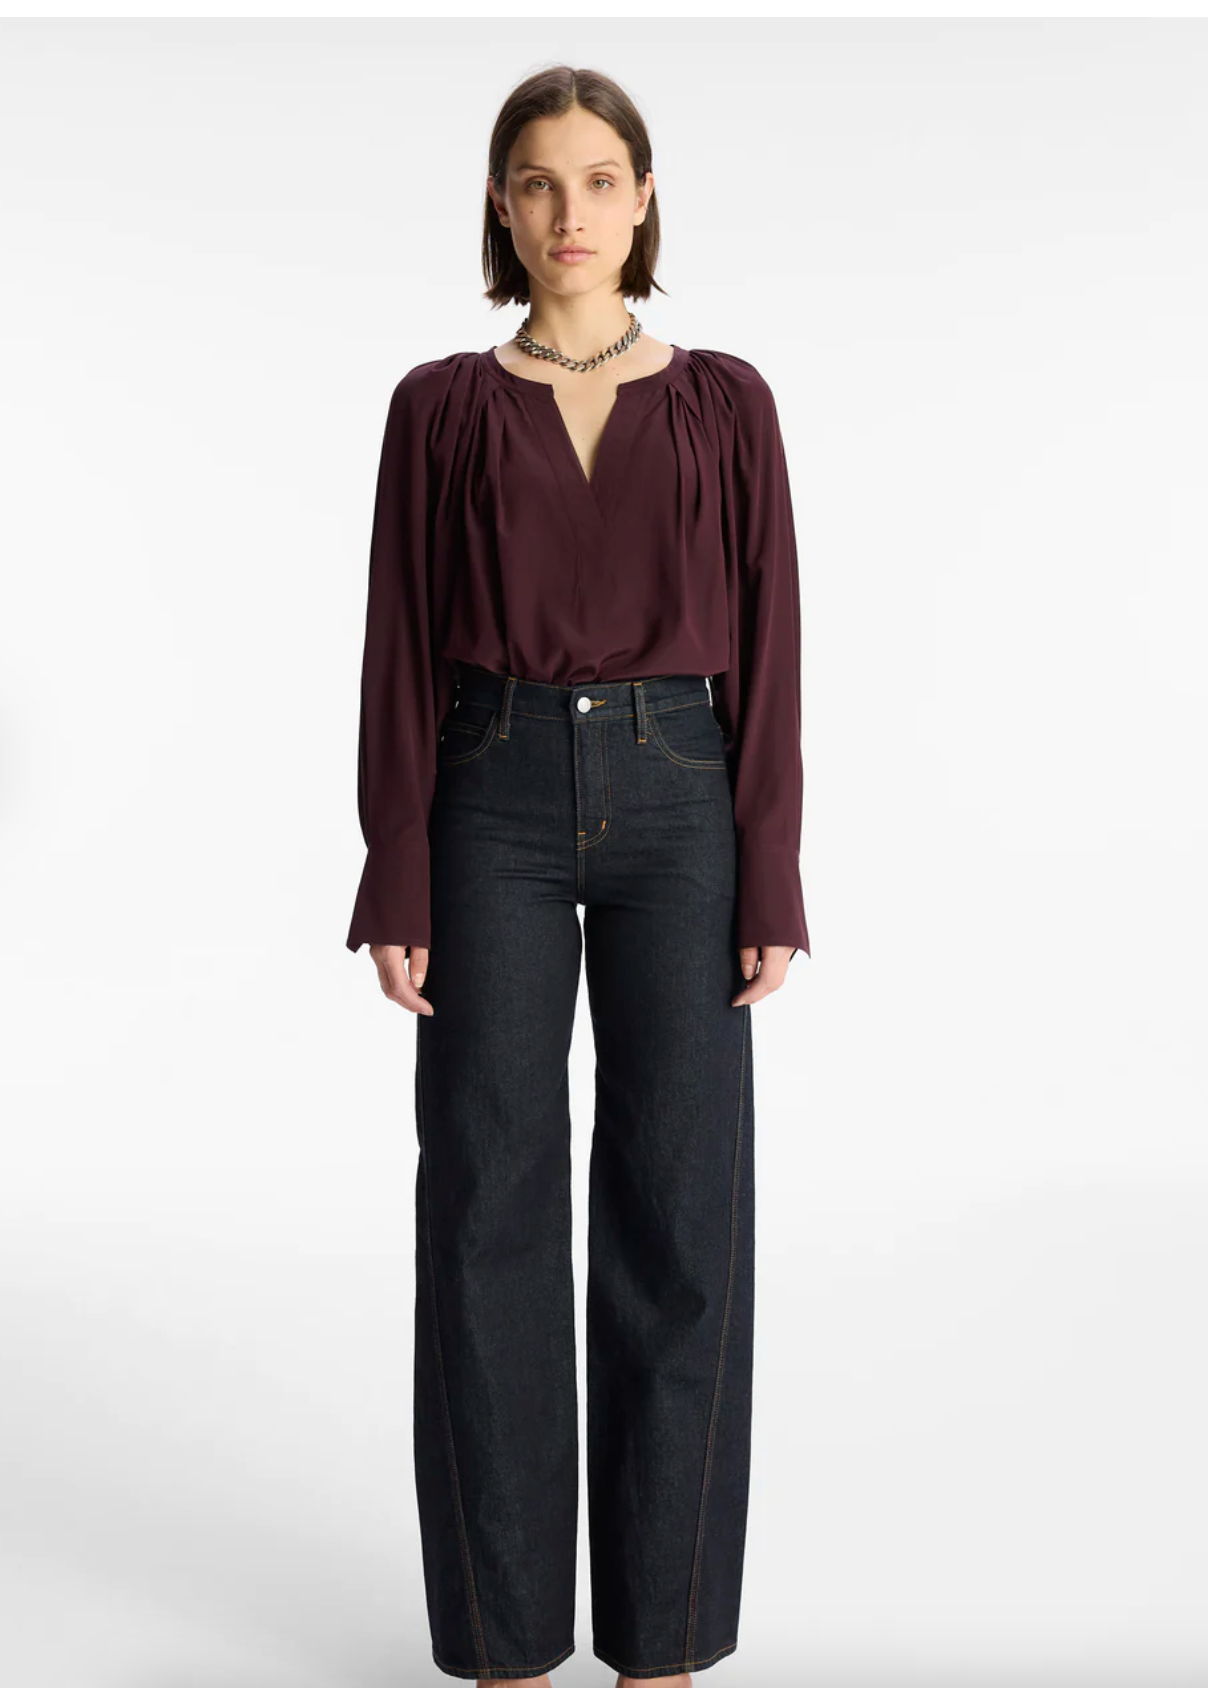 NOMAD SILK TOP IN CHICORY - Romi Boutique